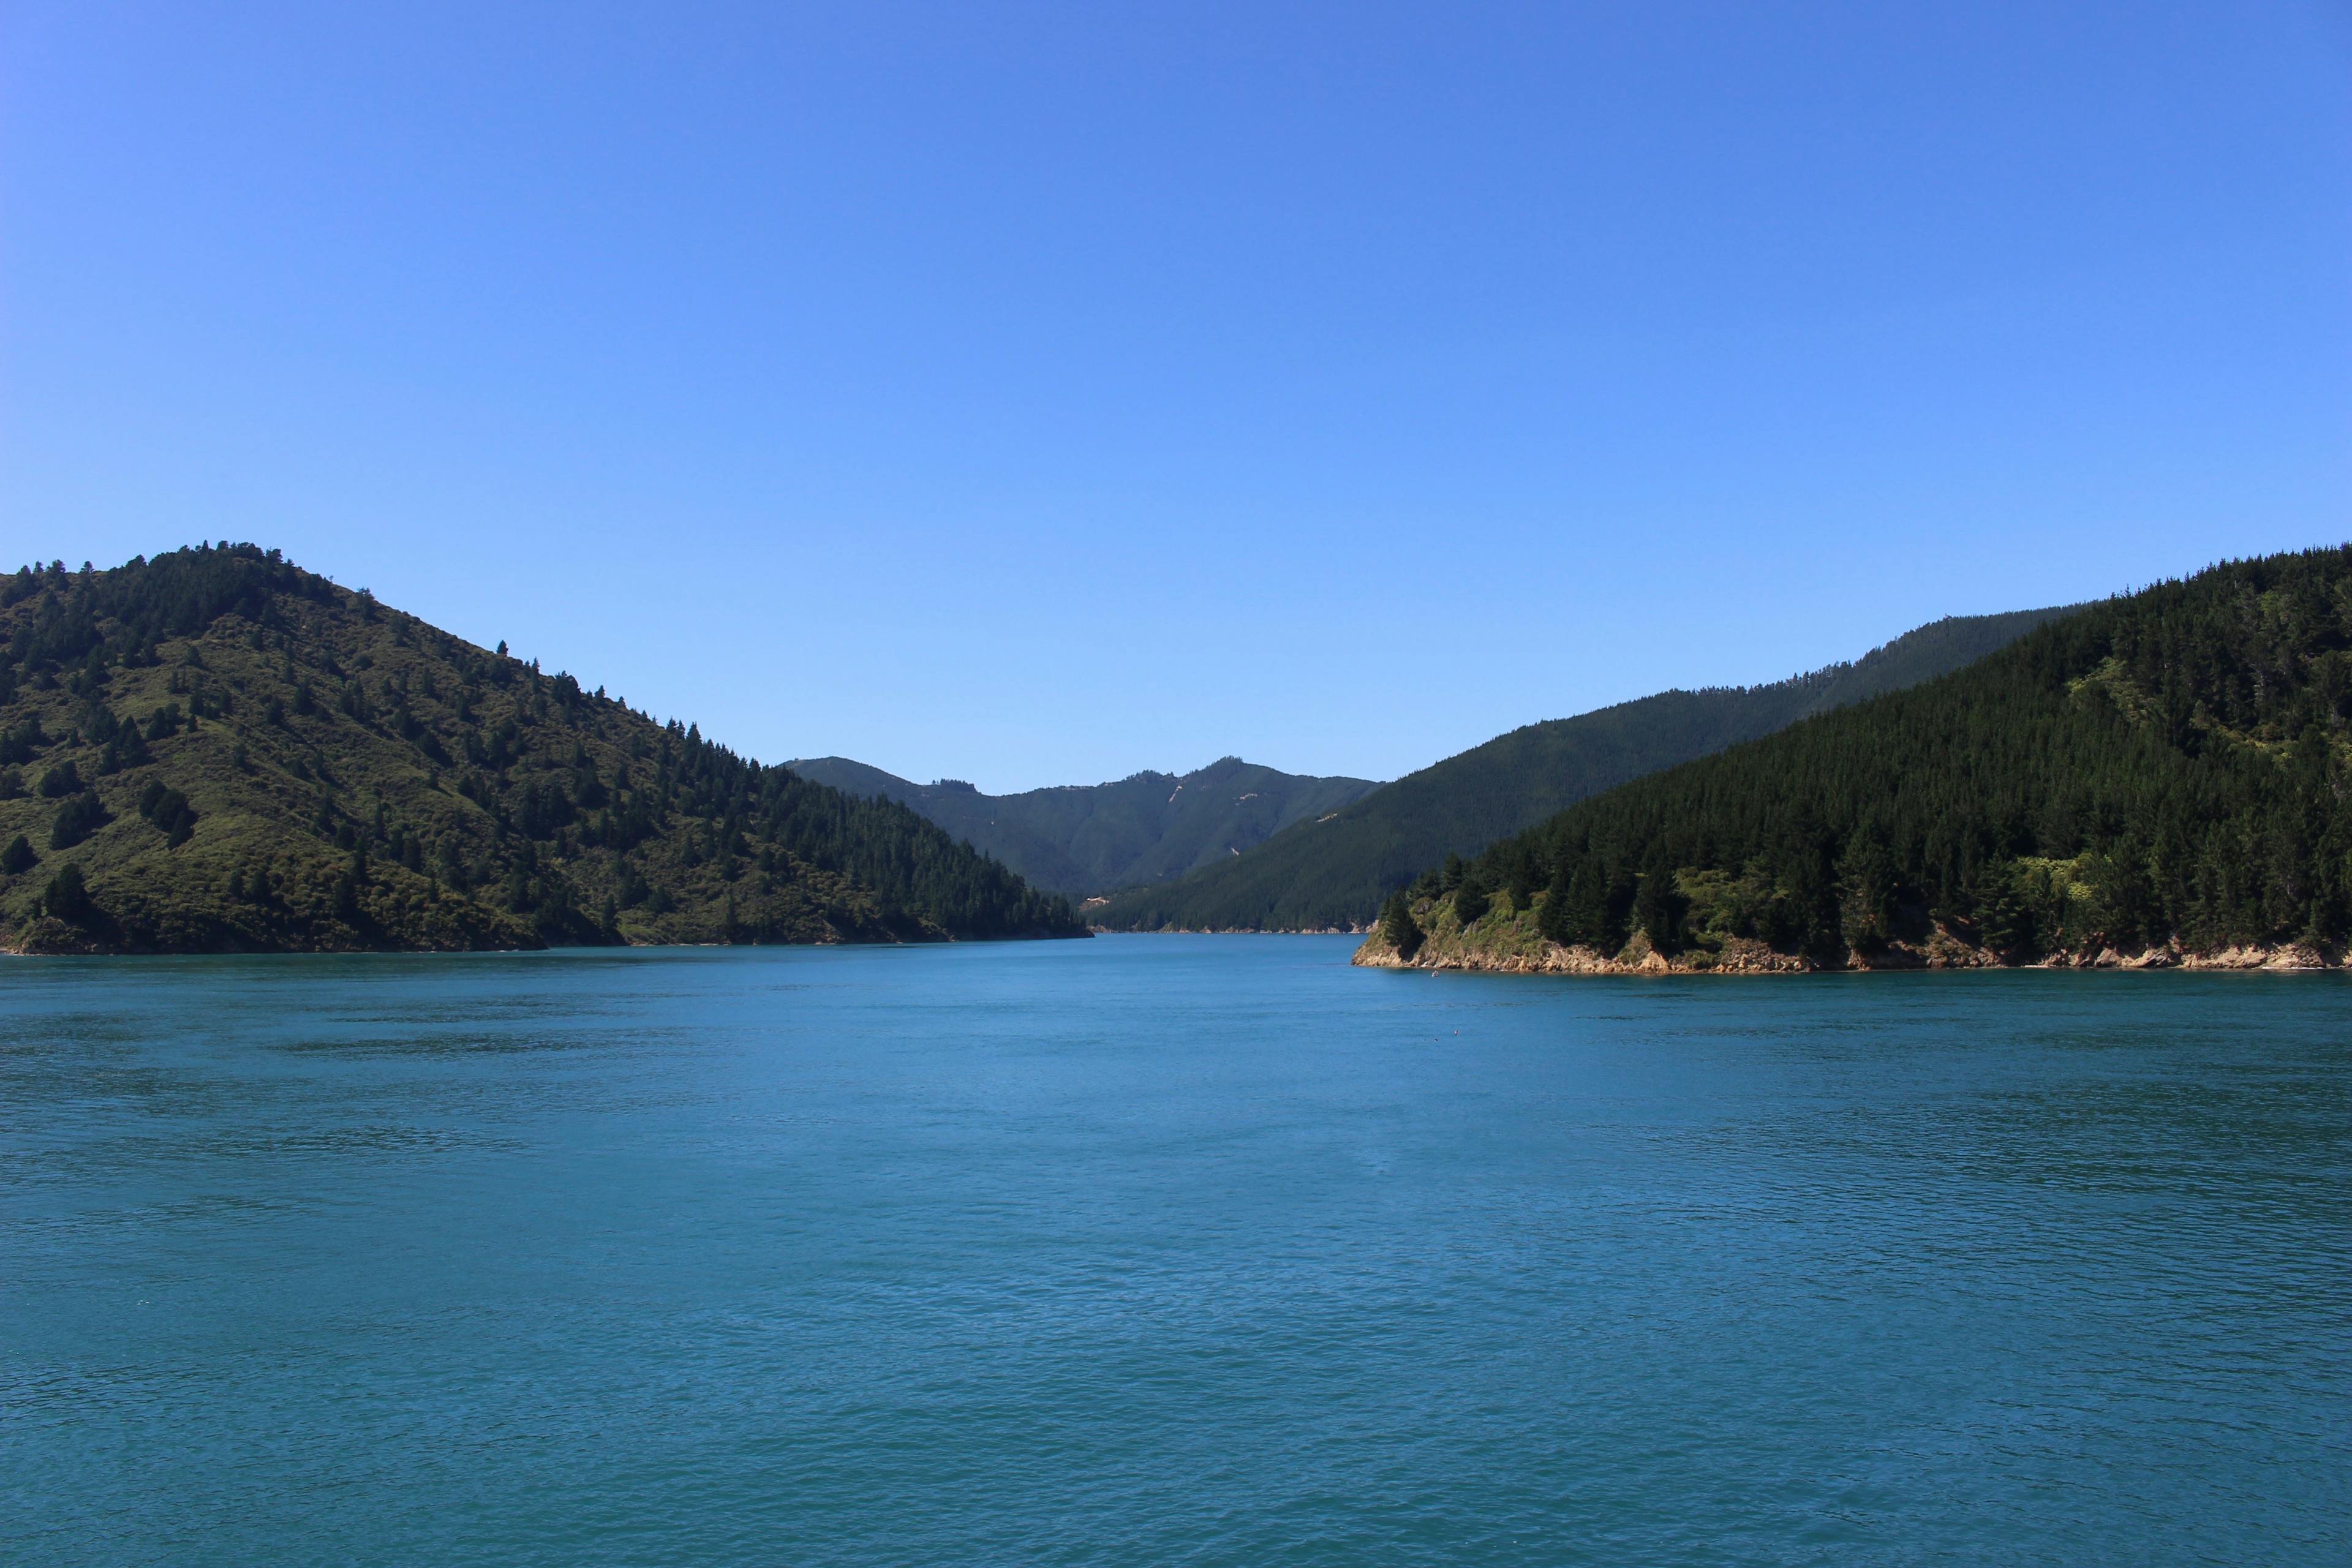 Views of the Queen Charlotte Sound